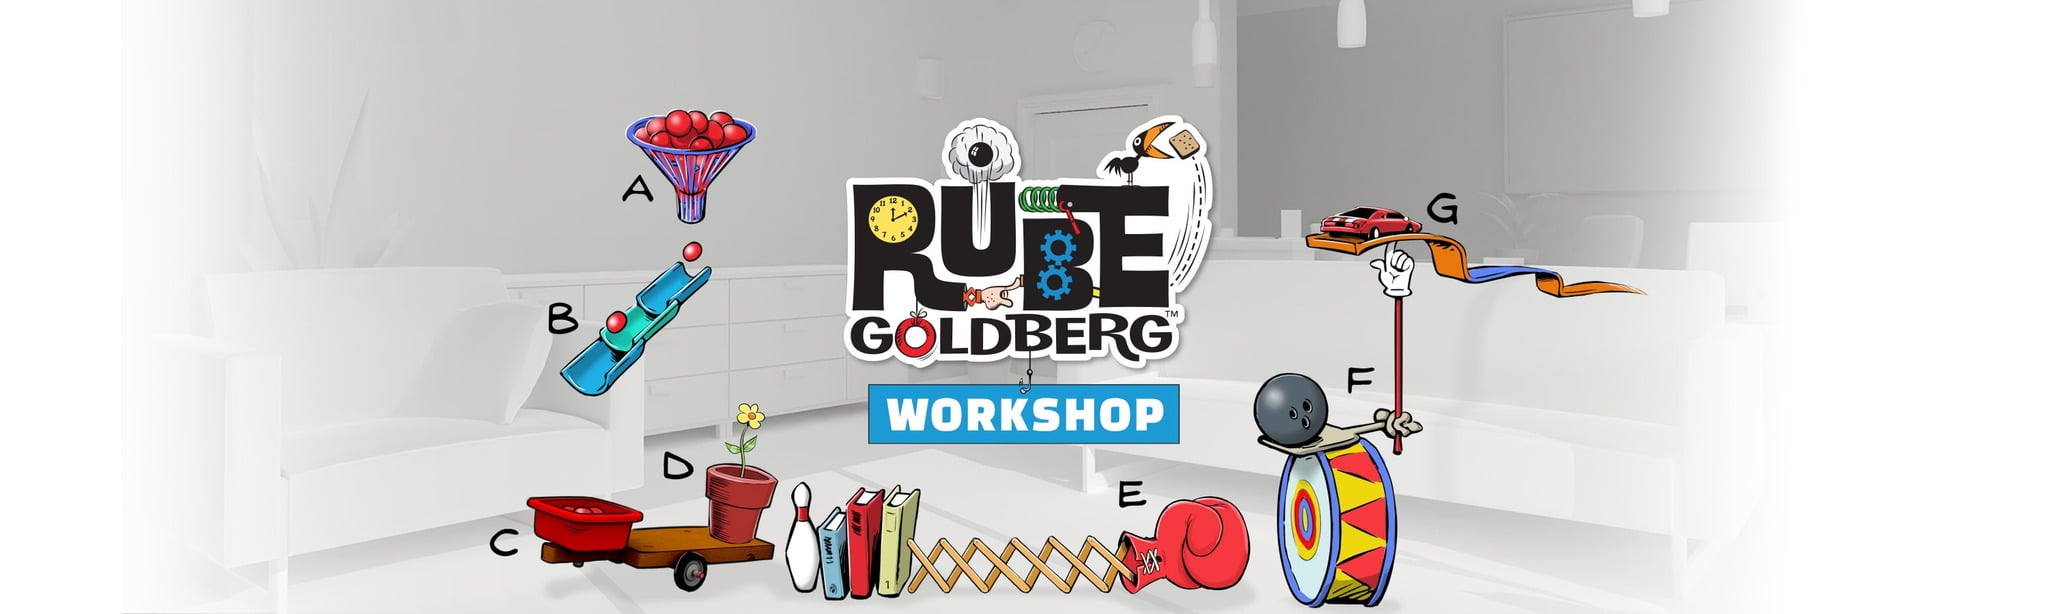 Build Rube Goldberg machines in VR and XR